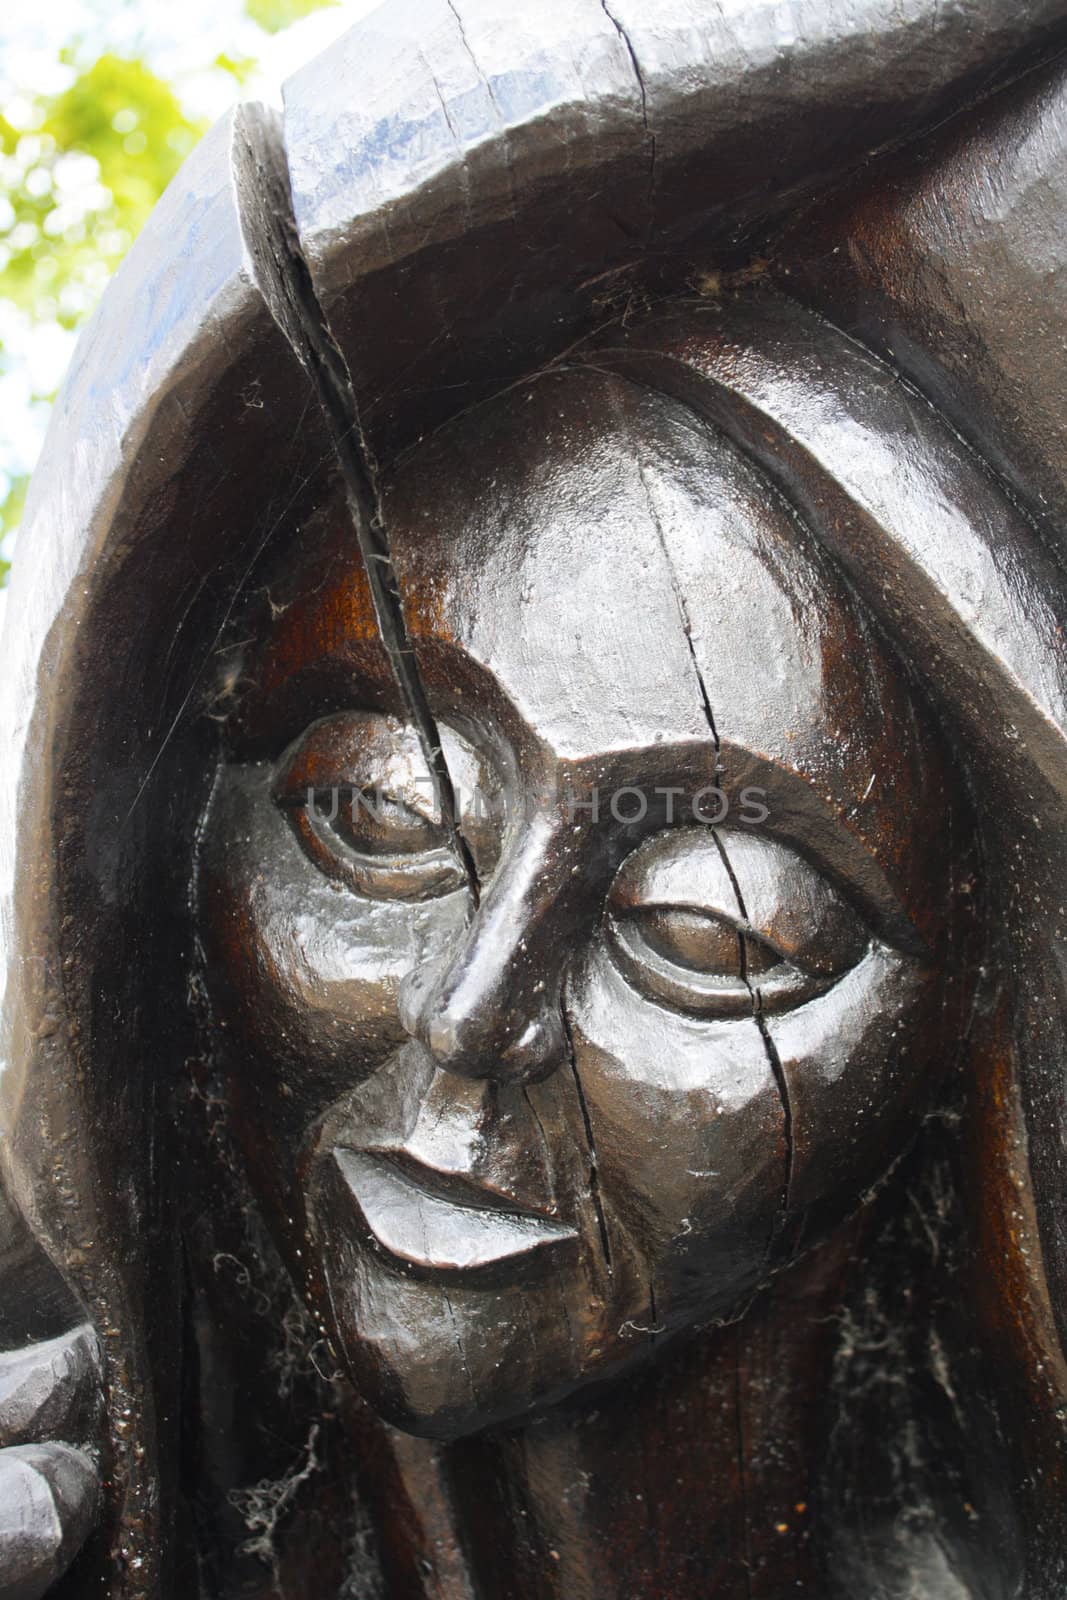 Wooden statue of face of a woman